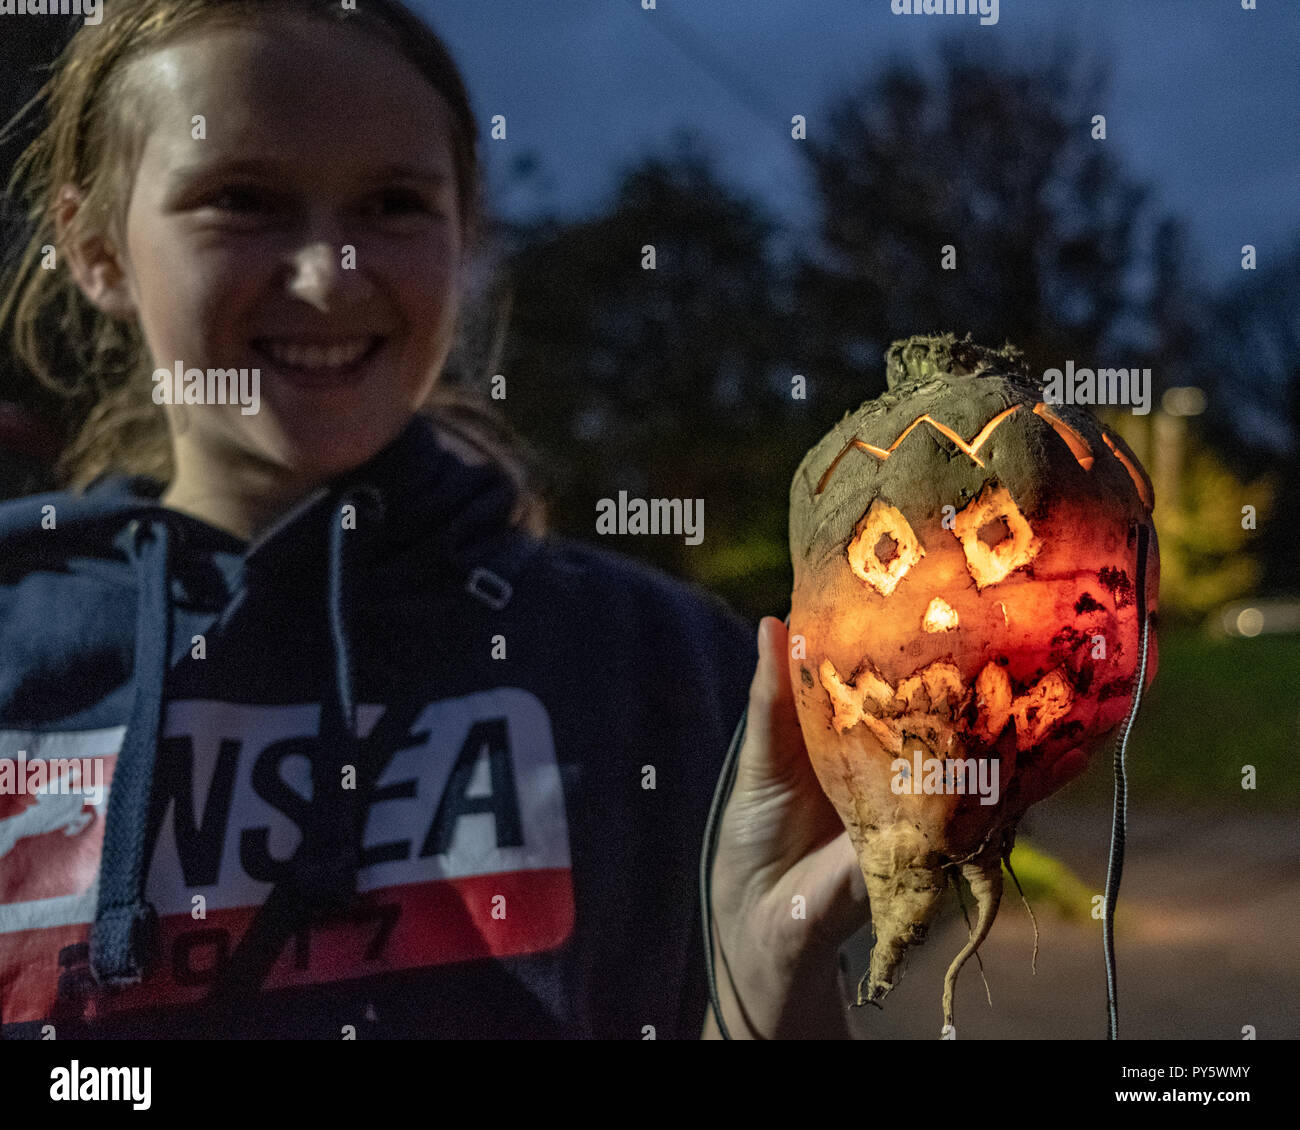 Hinton St George, Somerset, UK - 25 October 2018.  A young woman holds a "Punkie" during the annual "punkie night" procession around Hinton St George village. A "Punkie" is a hollowed out mangold or mangle-wrurzel with a lit candle inside to make a lantern. Although the origins of the custom are obscure legend has it that the wives of Hinton St George went to met their husbands as they came back from the Chiselbrough Fair, held on the last Thursday in October. They made lanterns out of hollowed out mangle-wurzels to light their way. Credit: Tom Corban/Alamy Live News Stock Photo